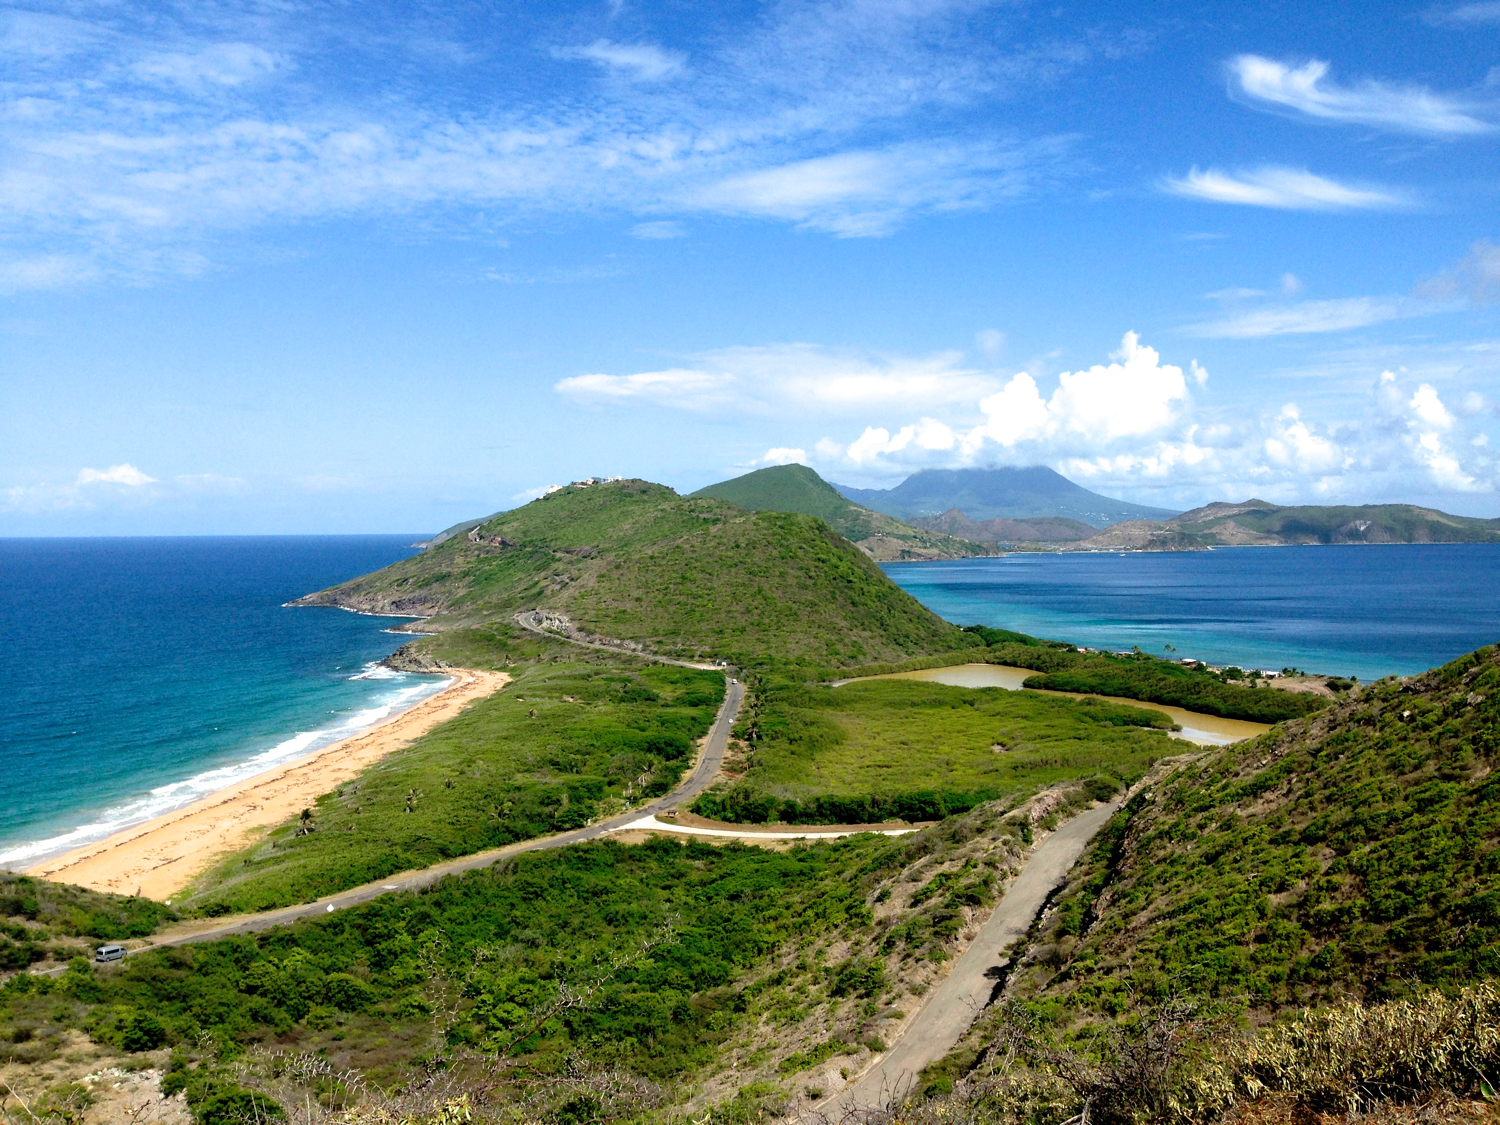 The view from St. Kitts, with Nevis in the background.